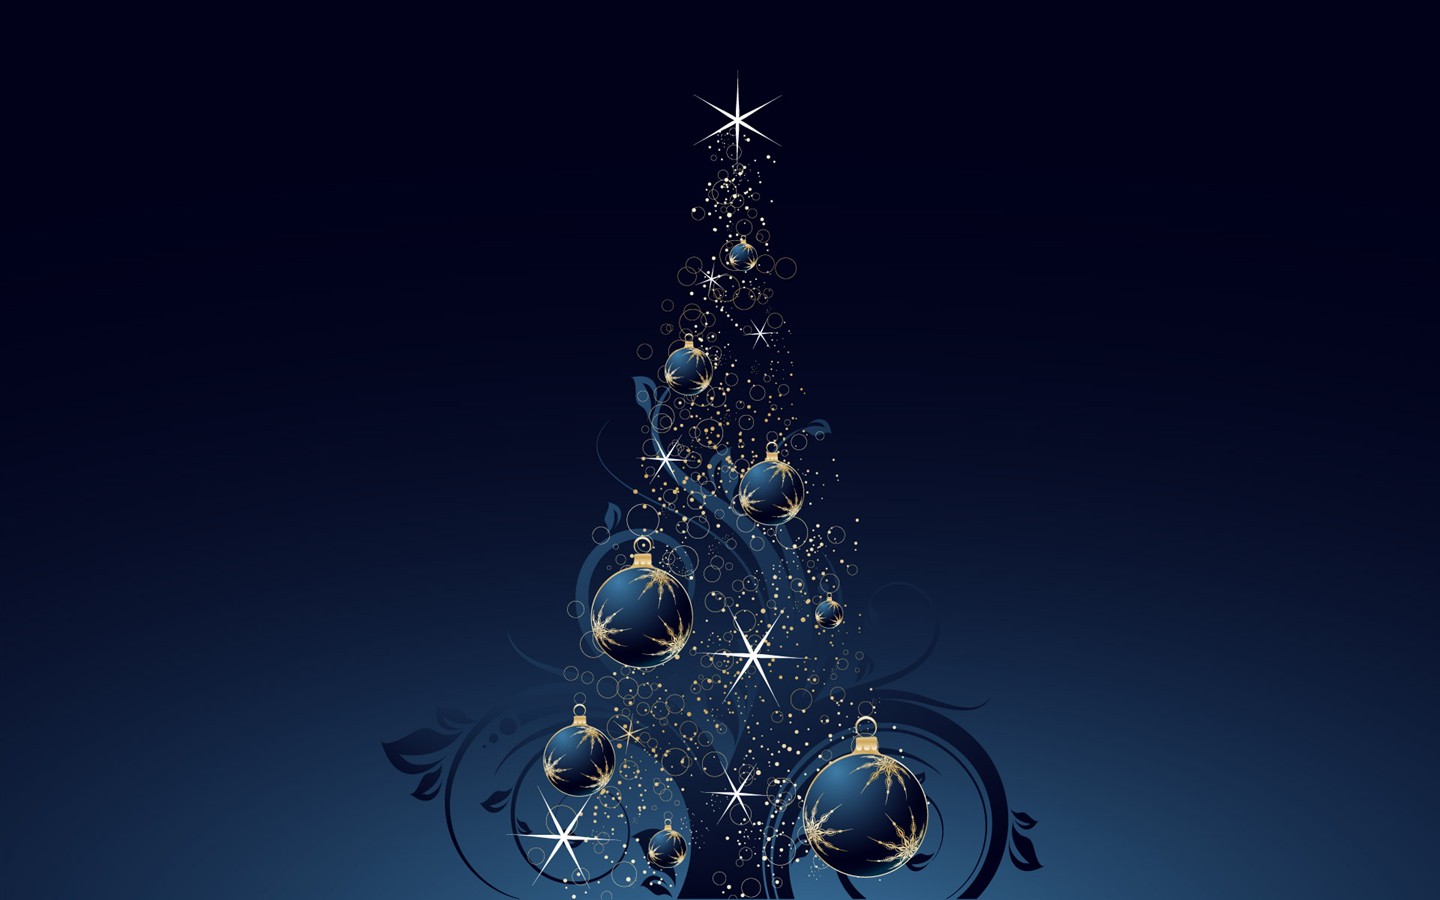 Exquisite Christmas Theme HD Wallpapers #37 - 1440x900